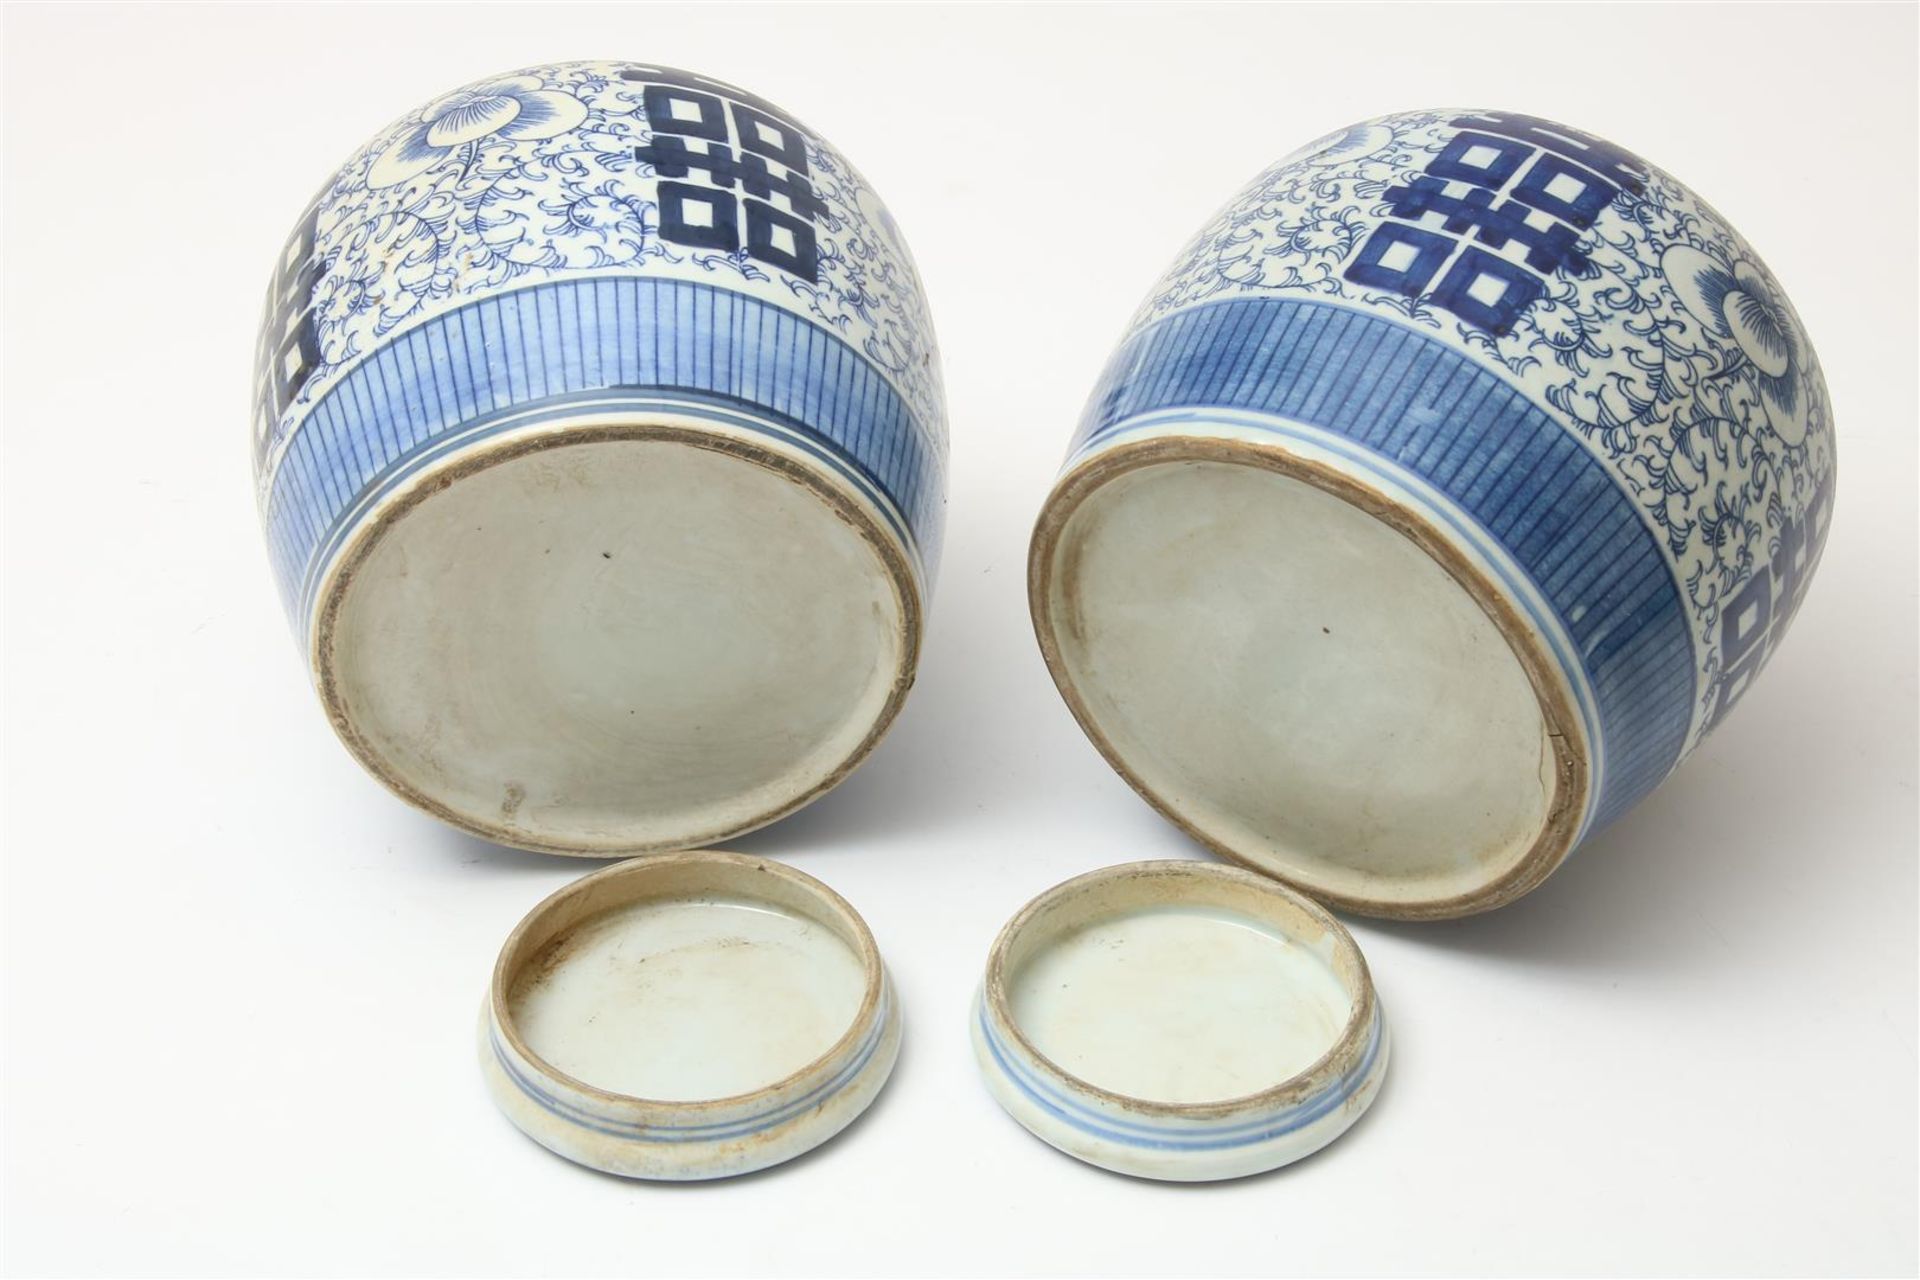 Set of blue and white porcelain ginger jars with lids decorated with blossom branches and - Image 4 of 4